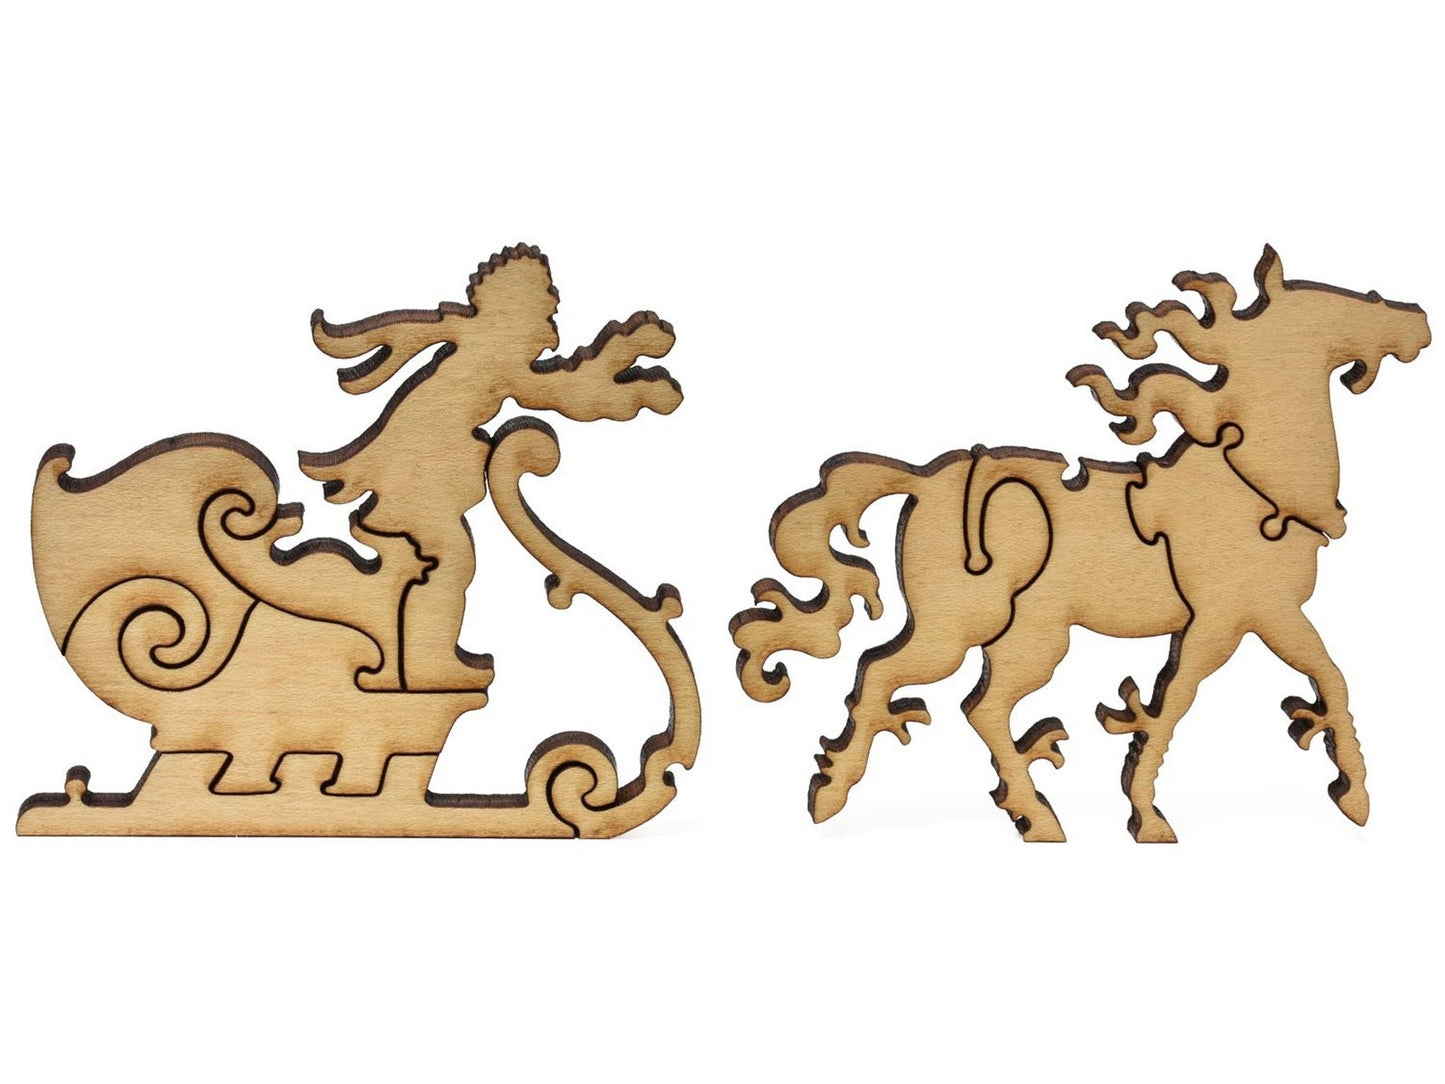 Second image for A closeup of pieces showing a horse and sleigh.